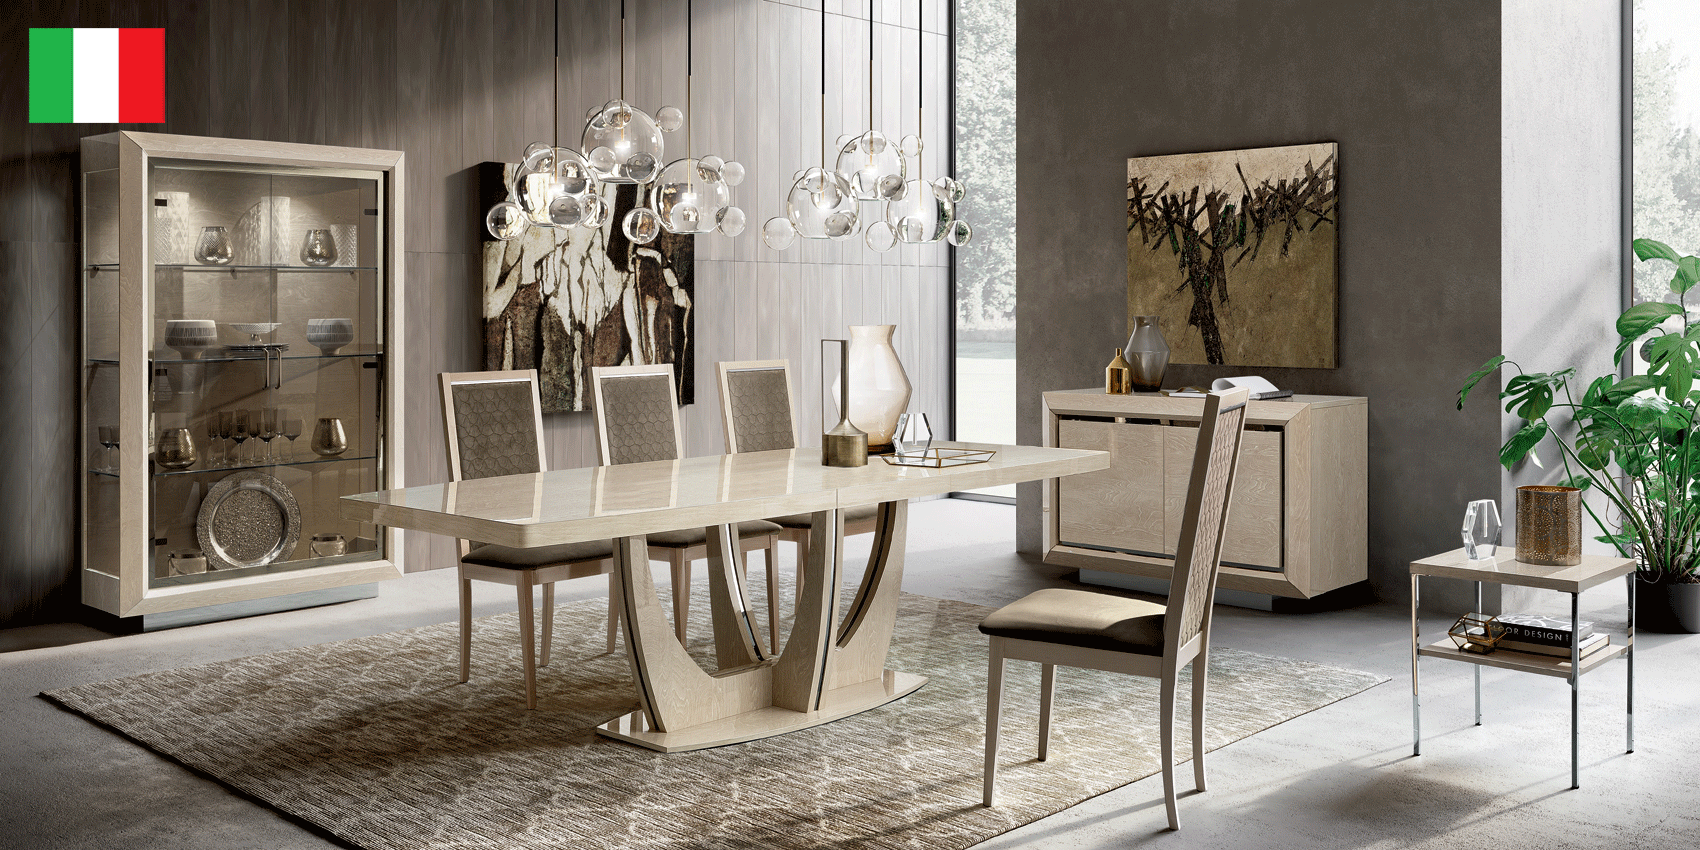 Brands Camel Gold Collection, Italy Elite Dining Ivory with Ambra “Rombi” Chairs